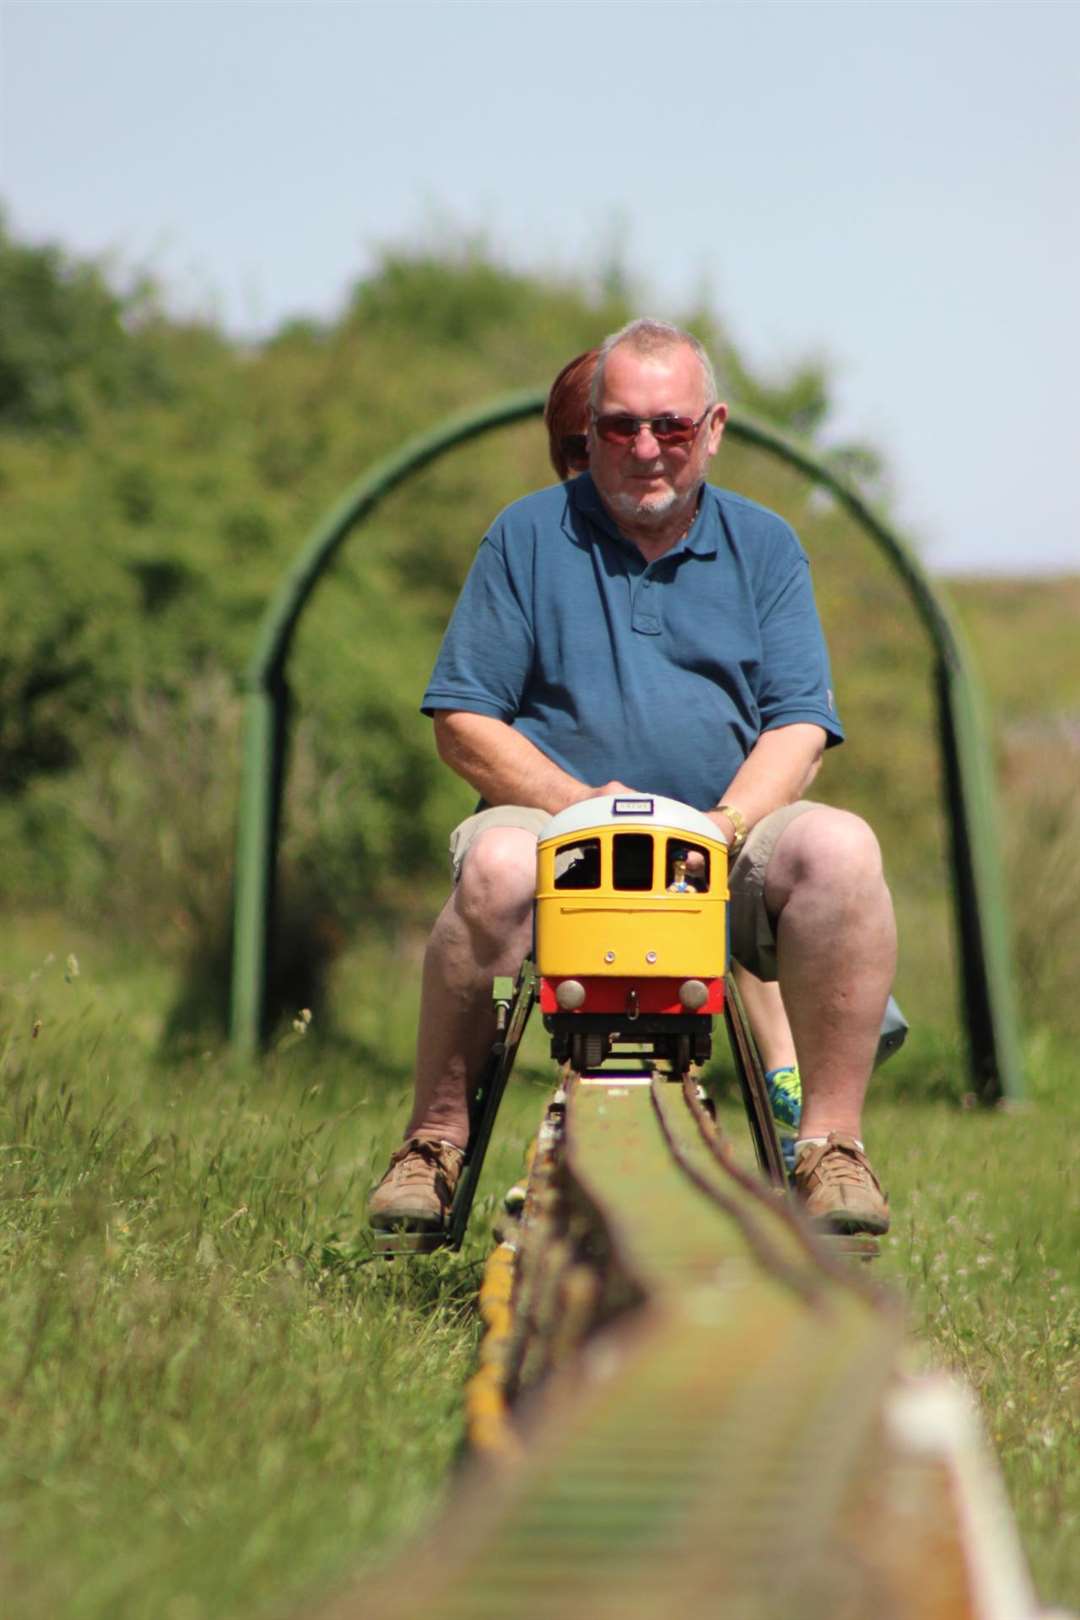 On track: treasurer Nigel Ingram on driver duty at for the Sheppey Miniature Engineering and Model Society at Barton's Point, Sheerness (2713883)